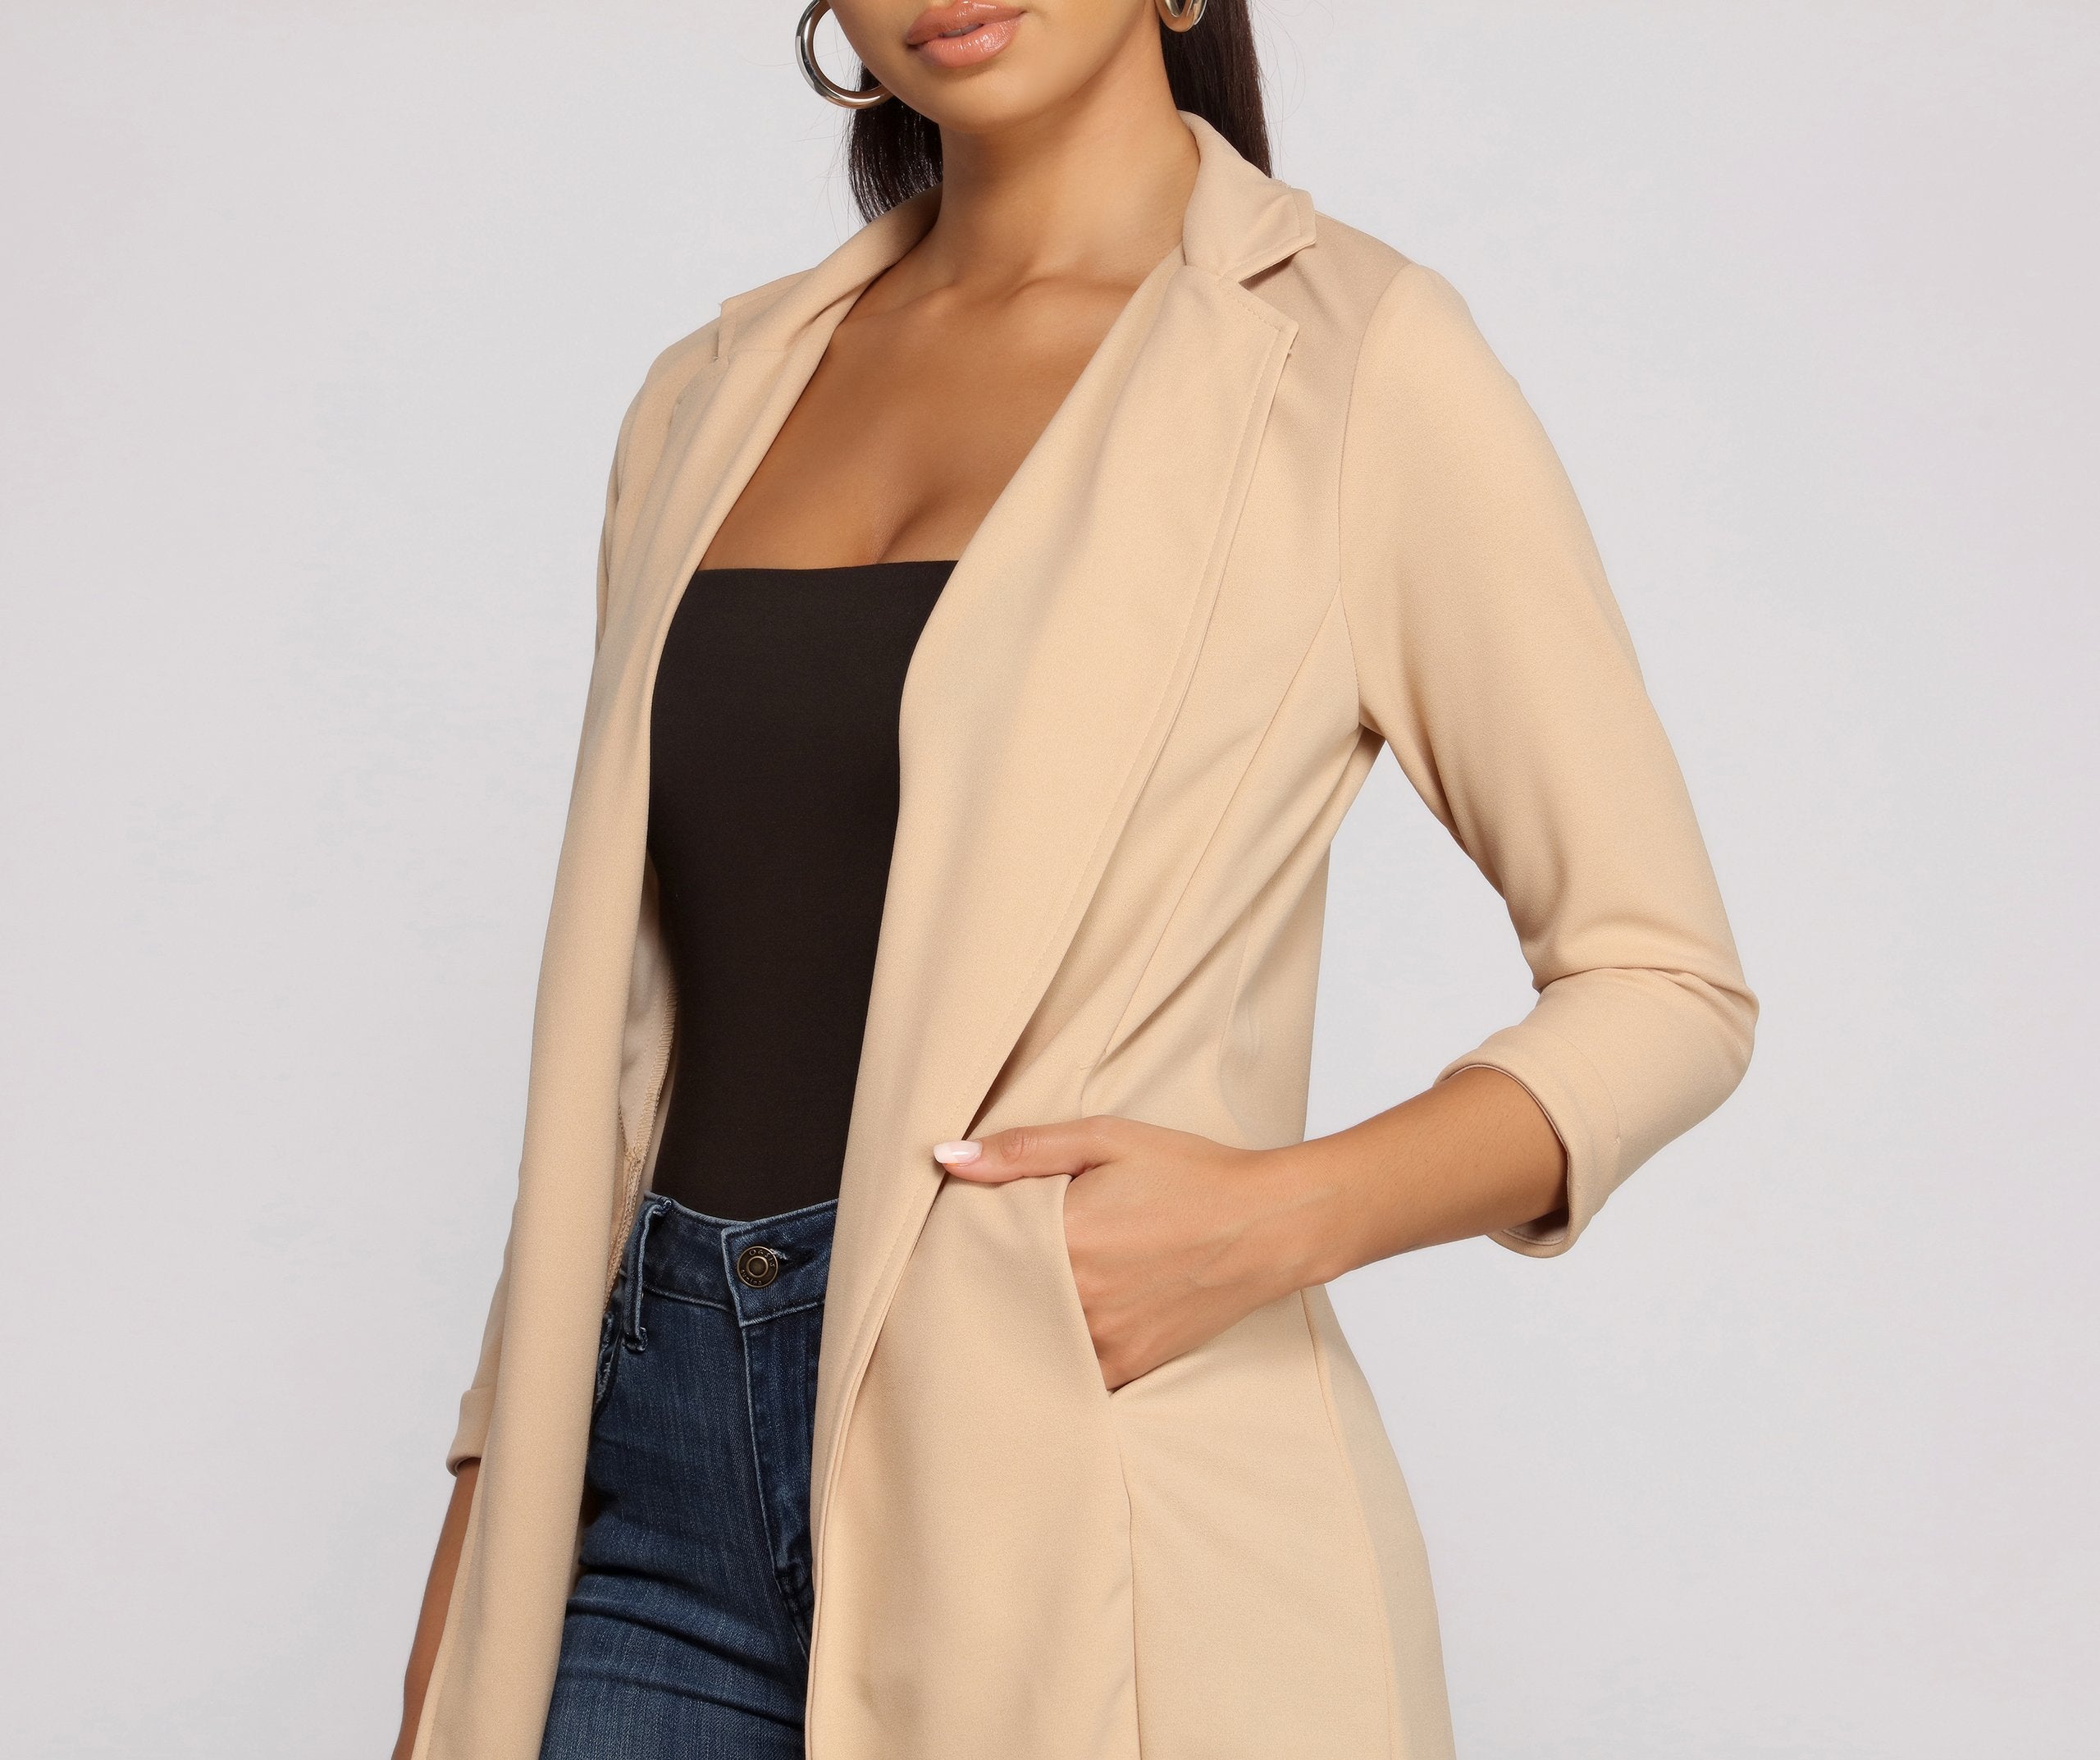 Miss Professional Long Line Blazer - Lady Occasions